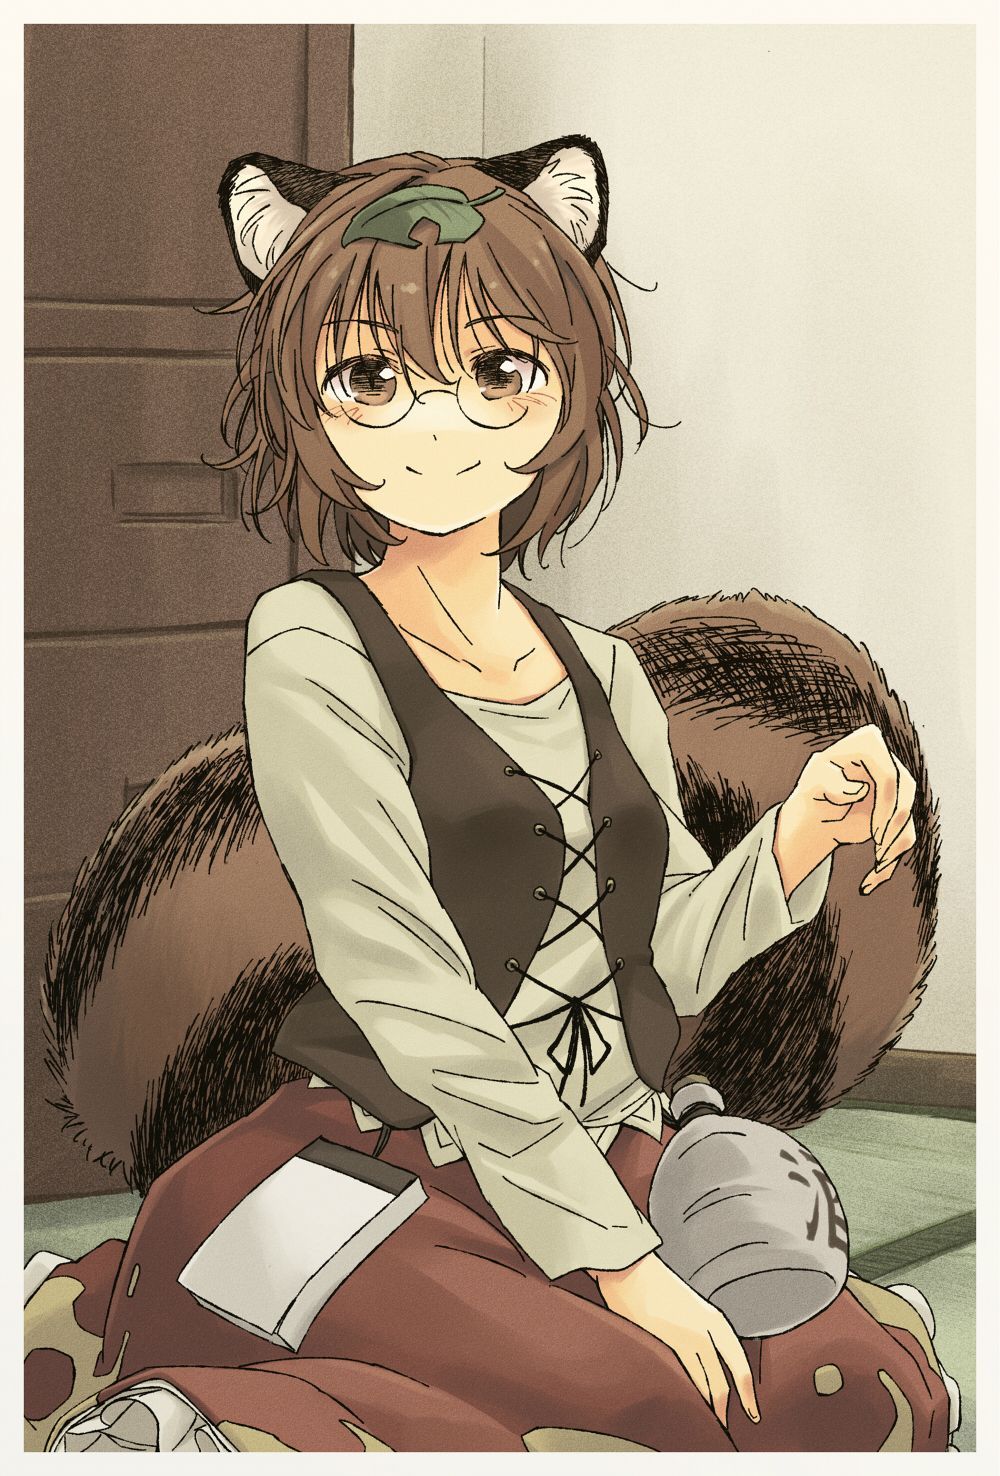 Secondary image of girl with animal ears 52